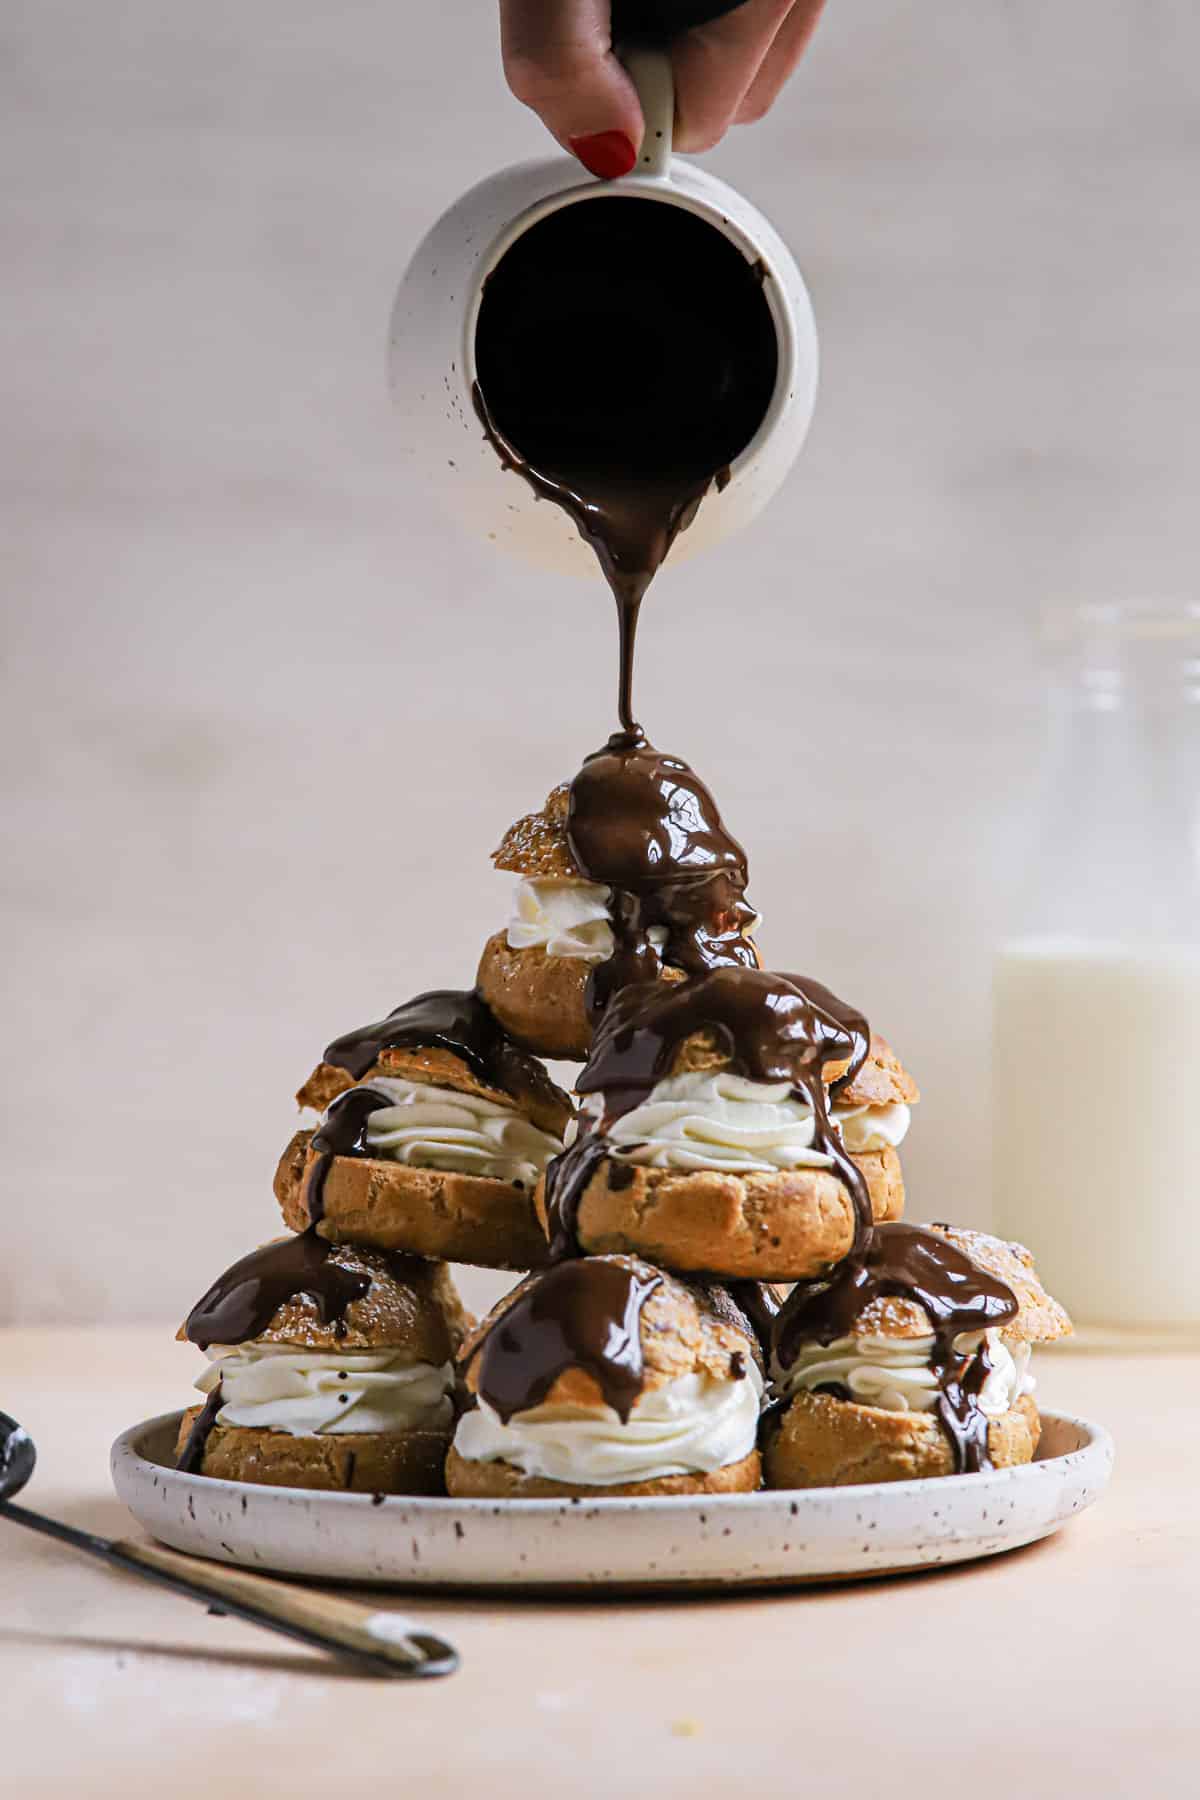 Cream Puffs being drizzled with chocolate.